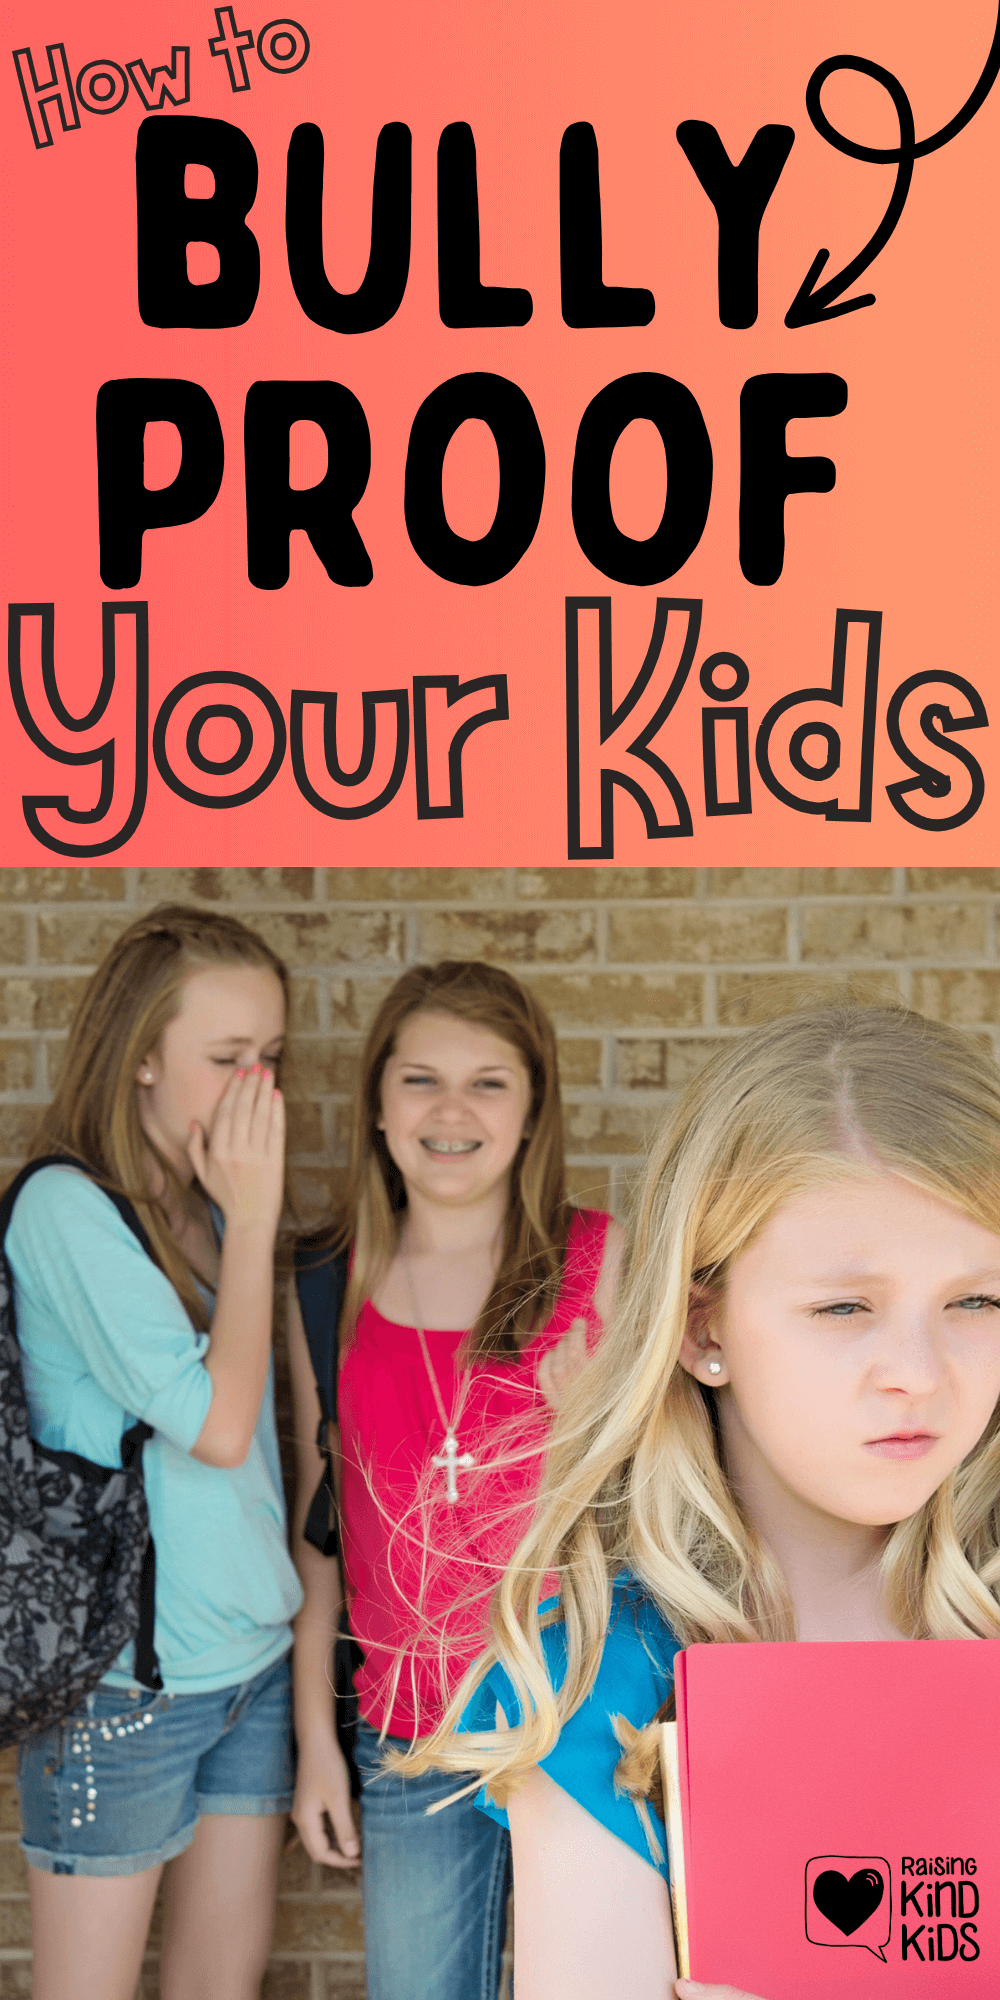 Bully-proof your kids with these 14 tips to help prevent bullying and help stop bullying. #bullyprevention #stopbullying #endbullying